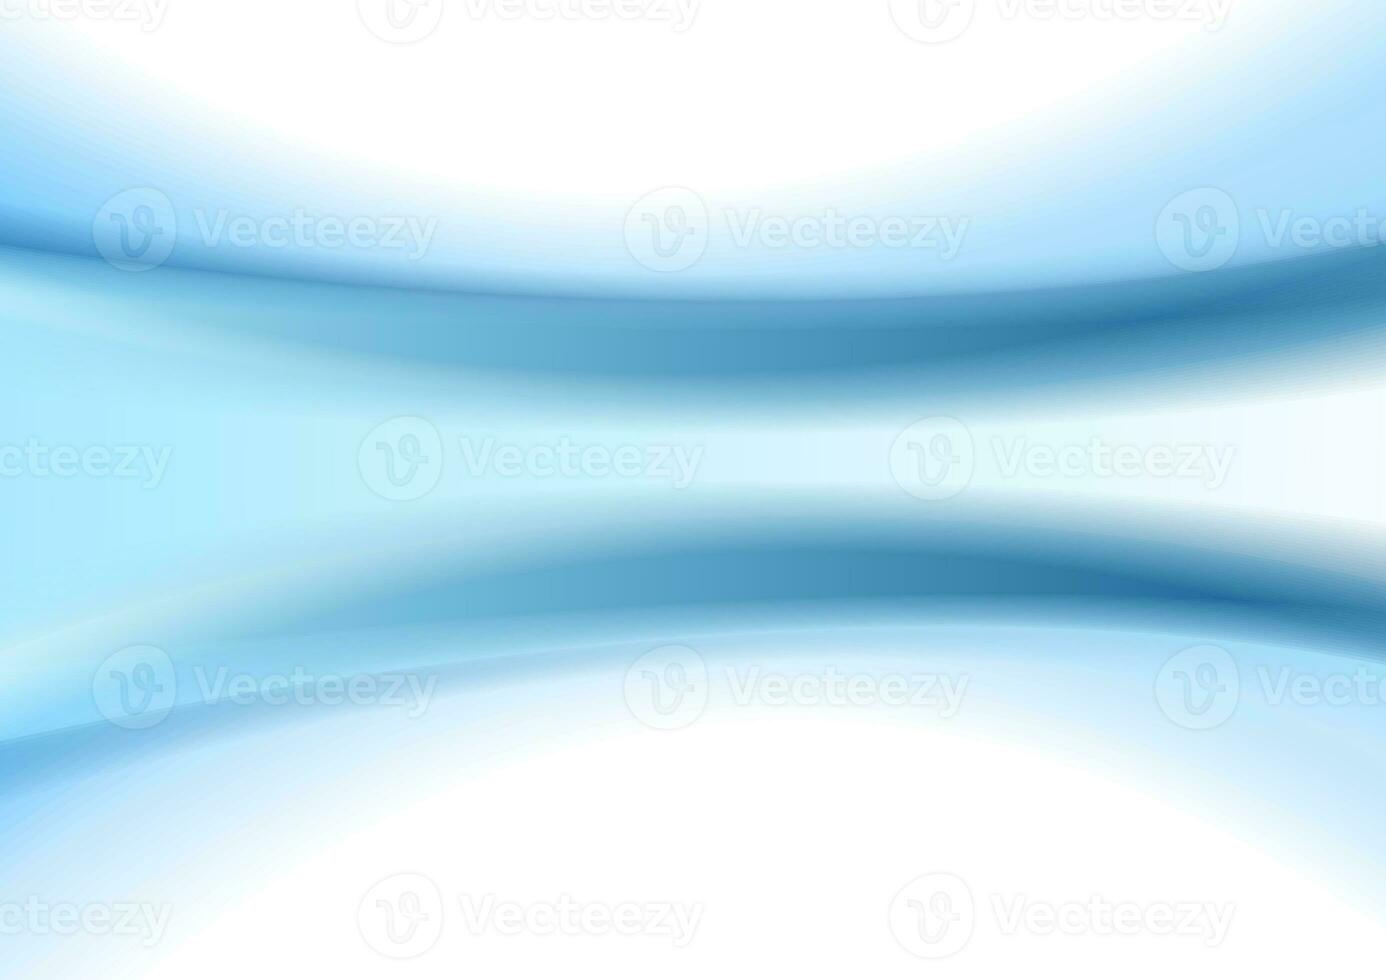 Abstract blue smooth blurred waves background photo